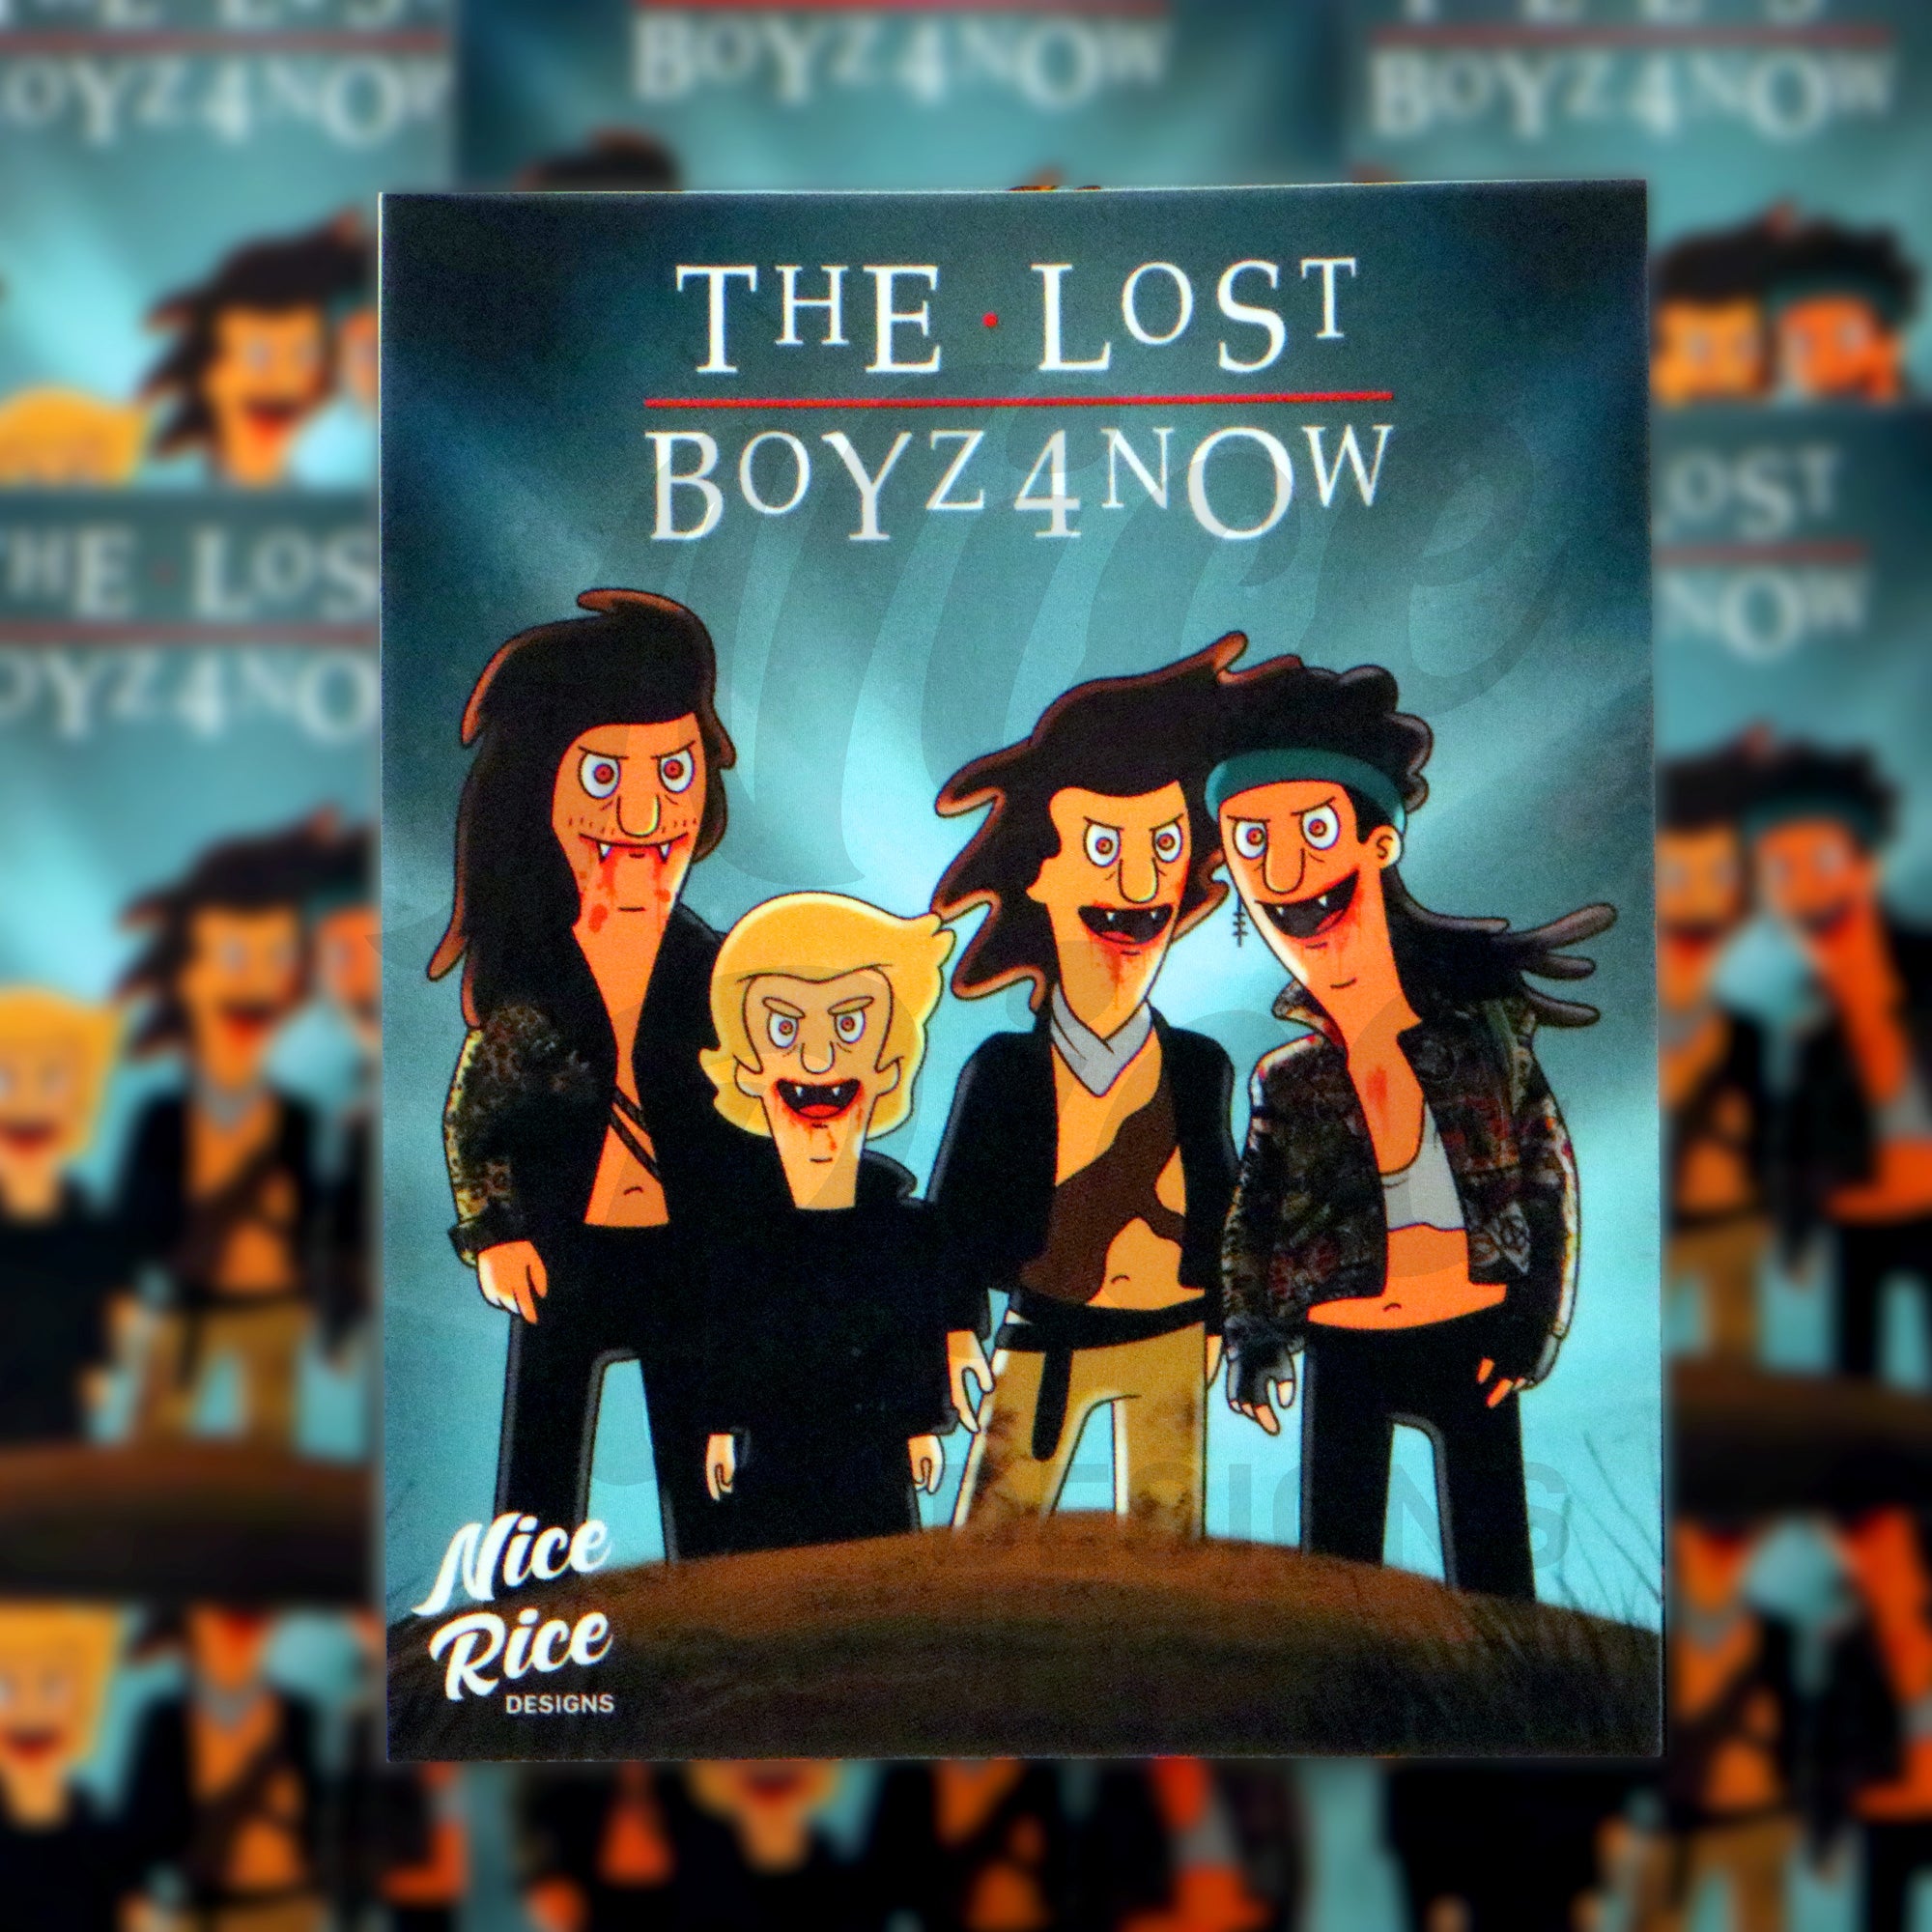 The Lost Boyz 4 Now Sticker by Nice Rice Designs